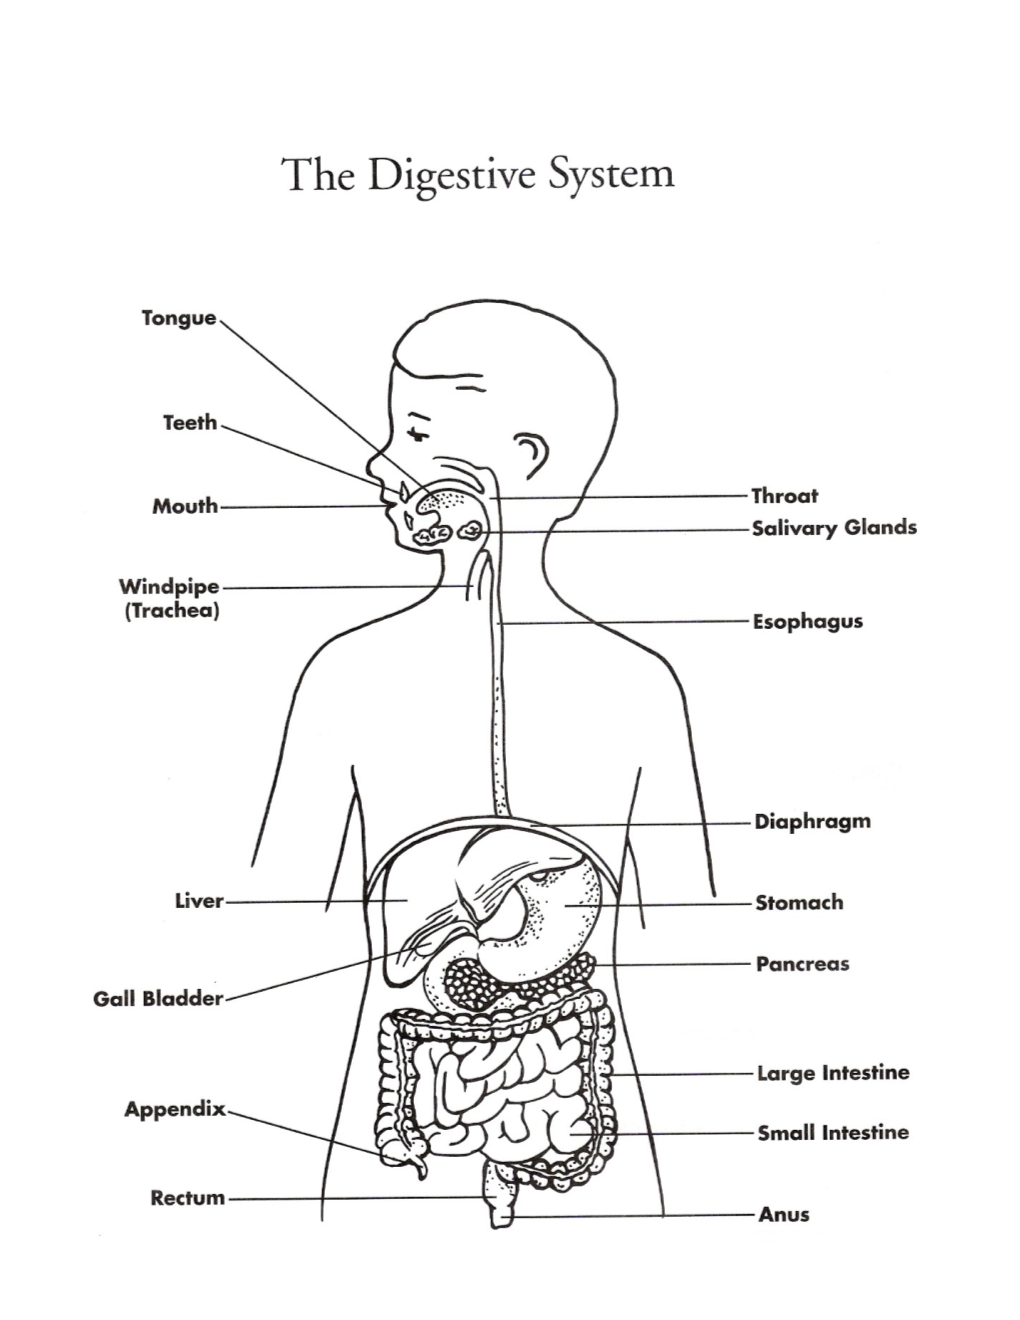 Rubric: Measuring the Monstrous Digestive System